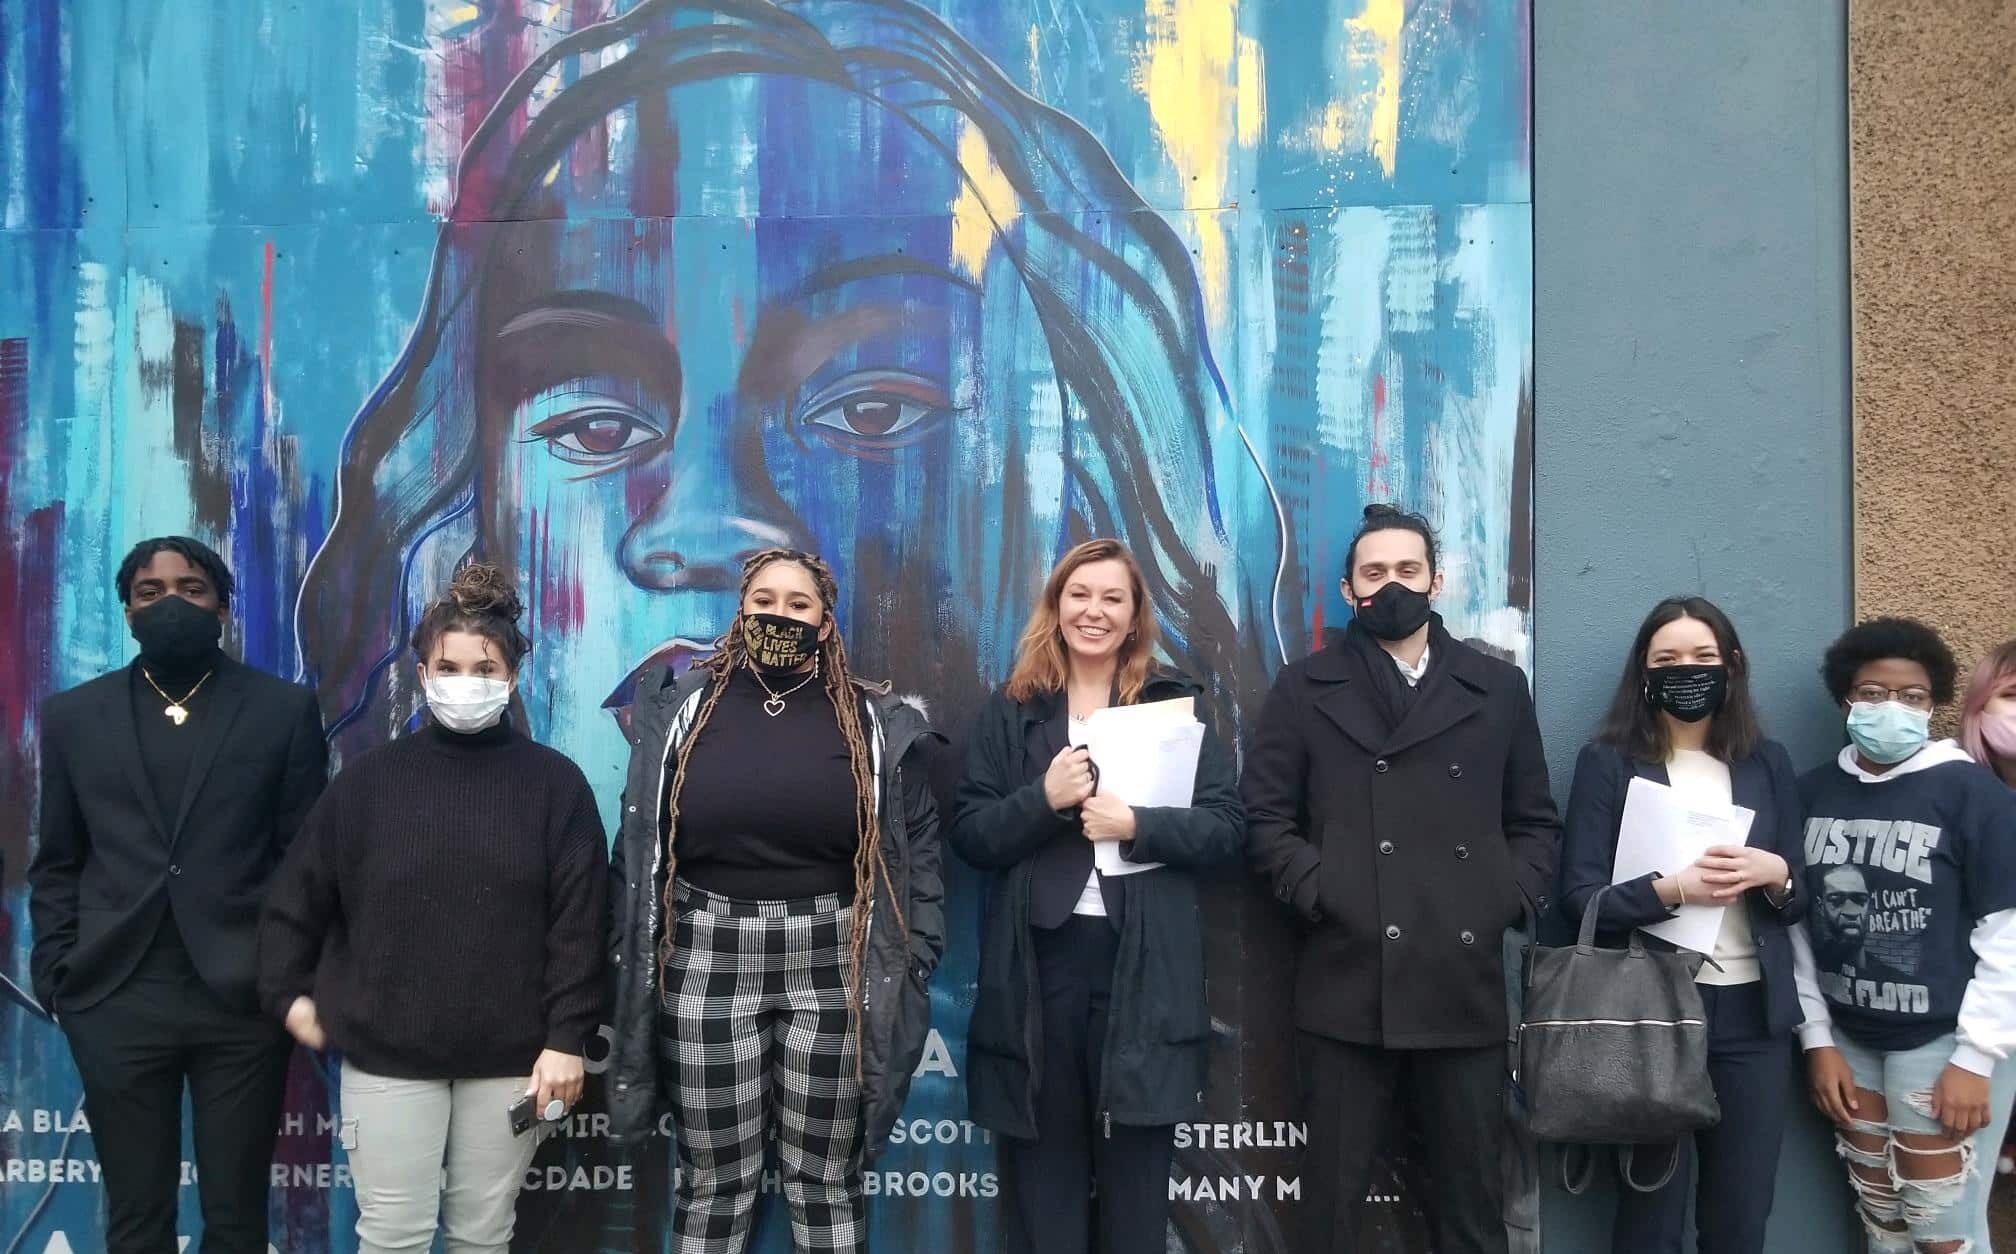 Black Unity members and CLDC lawyers stand in front of a blue and multicolored mural.